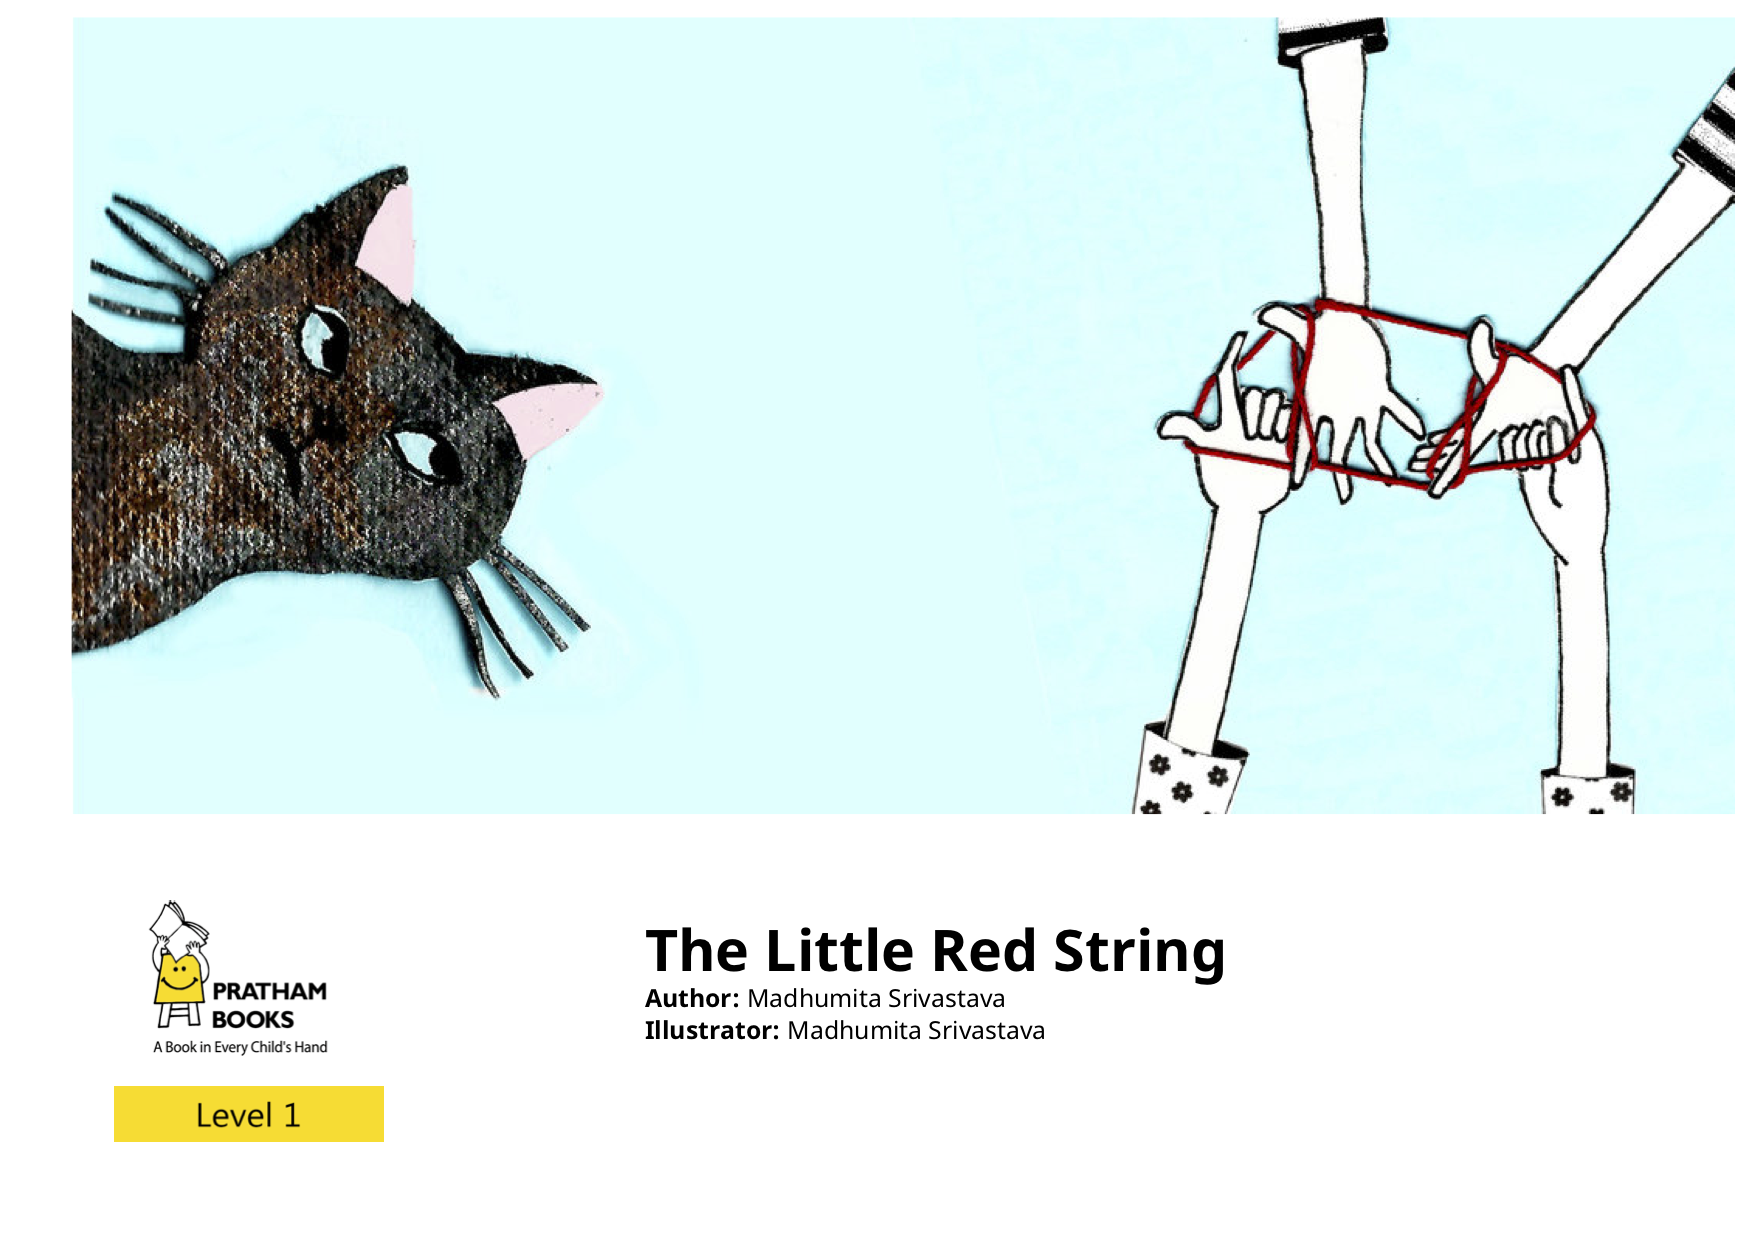 The Little Red String